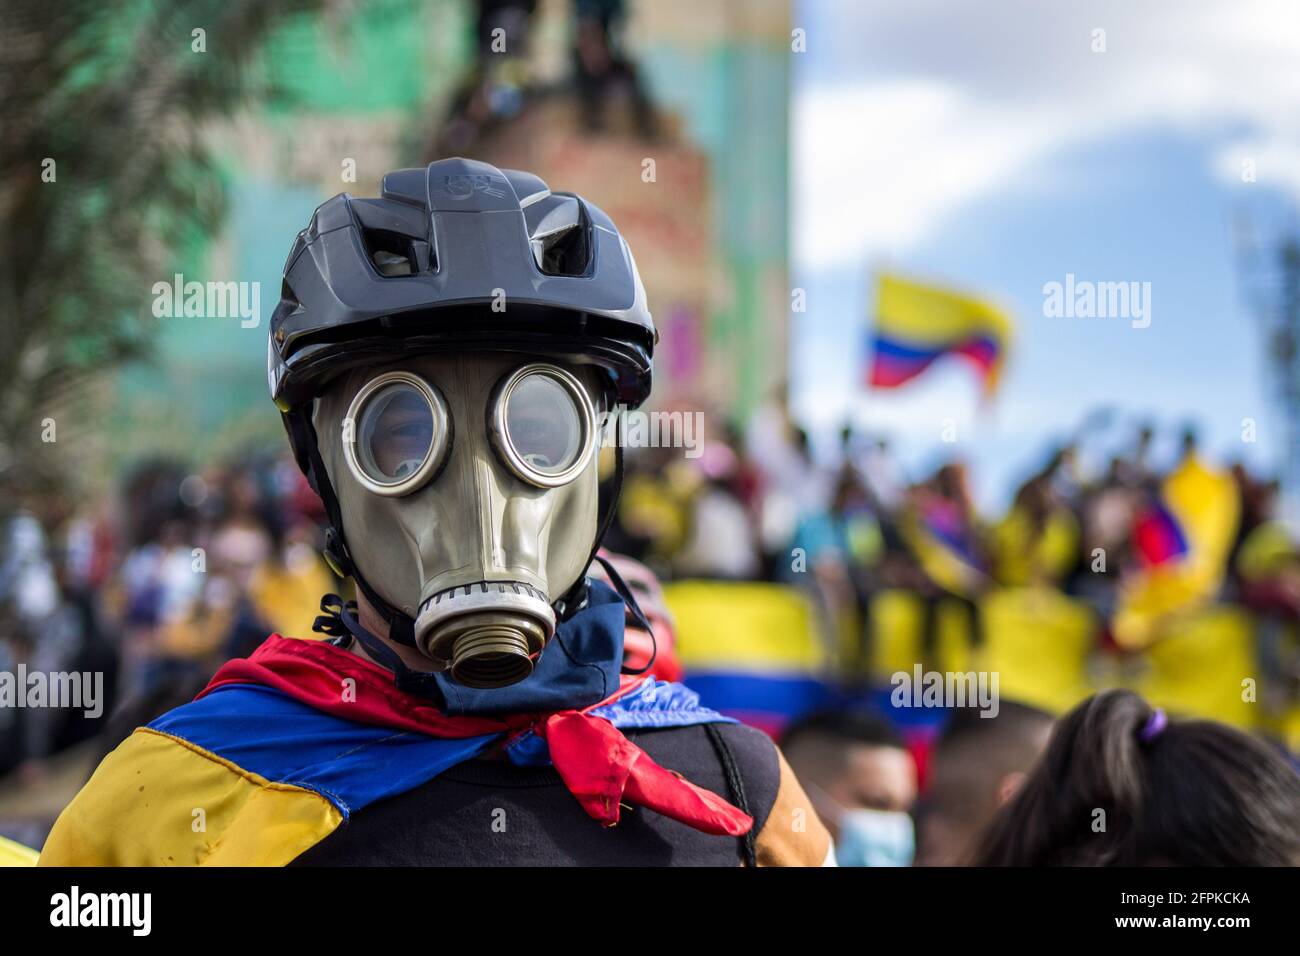 A protester wearing a gas mask takes part in the 19th of May national strike. in Bogotá.Plaza de Los Heroes (Heroes square) in Bogotá, was one of the 40 points of demonstration during the 19th of May national strike. A total of fifteen thousand people took part in the strike, on the 22nd day of protest. The protests in different parts of the country began to oppose tax reform. Police have responded with extreme violence, and the demands have multiplied as the economic crisis sharpen. (Photo by Antonio Cascio/SOPA Images/Sipa USA) Stock Photo